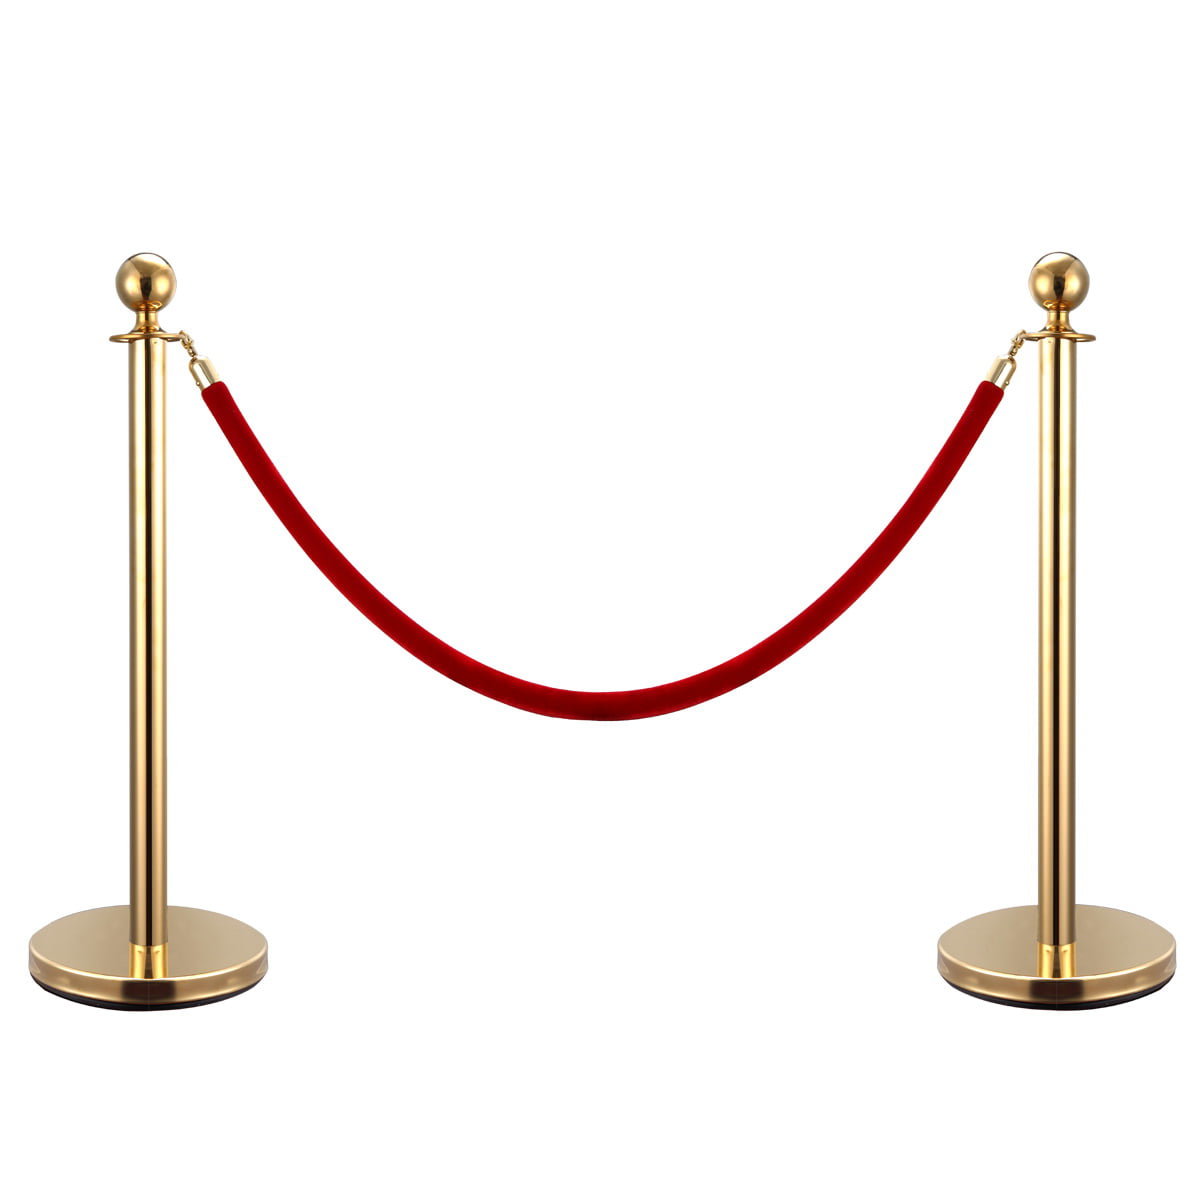 Barrier Rope Crowd Control Stanchion 60" Red Velvet Rope with Gold Hardware 